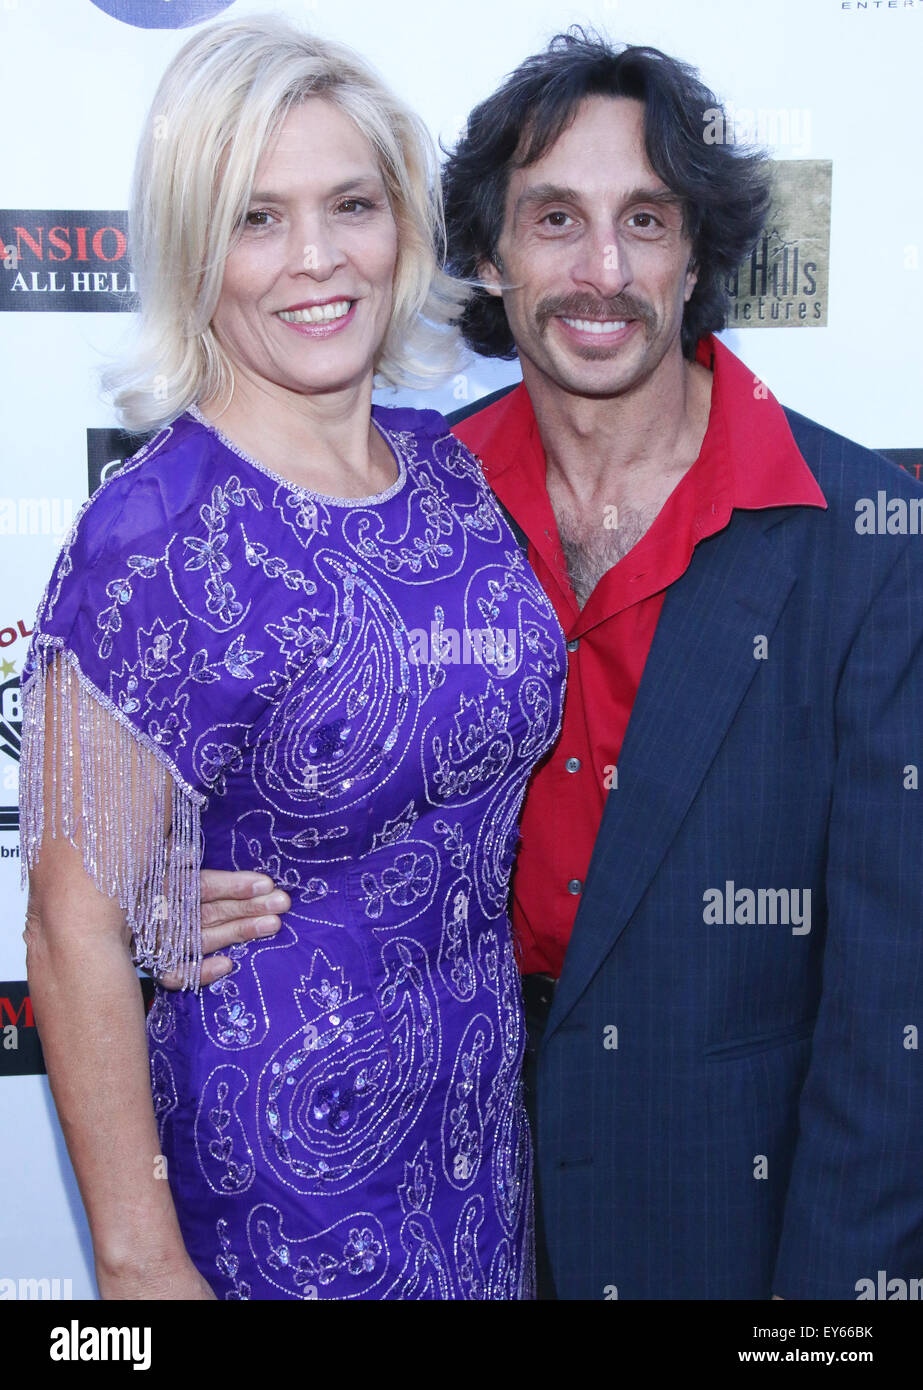 Mansion Of Blood' premiere and awards ceremony at American Cinematheque's Egyptian Theatre - Arrivals  Featuring: Calista Carradine, David Jonathan Ross Where: Los Angeles, California, United States When: 20 May 2015 Stock Photo